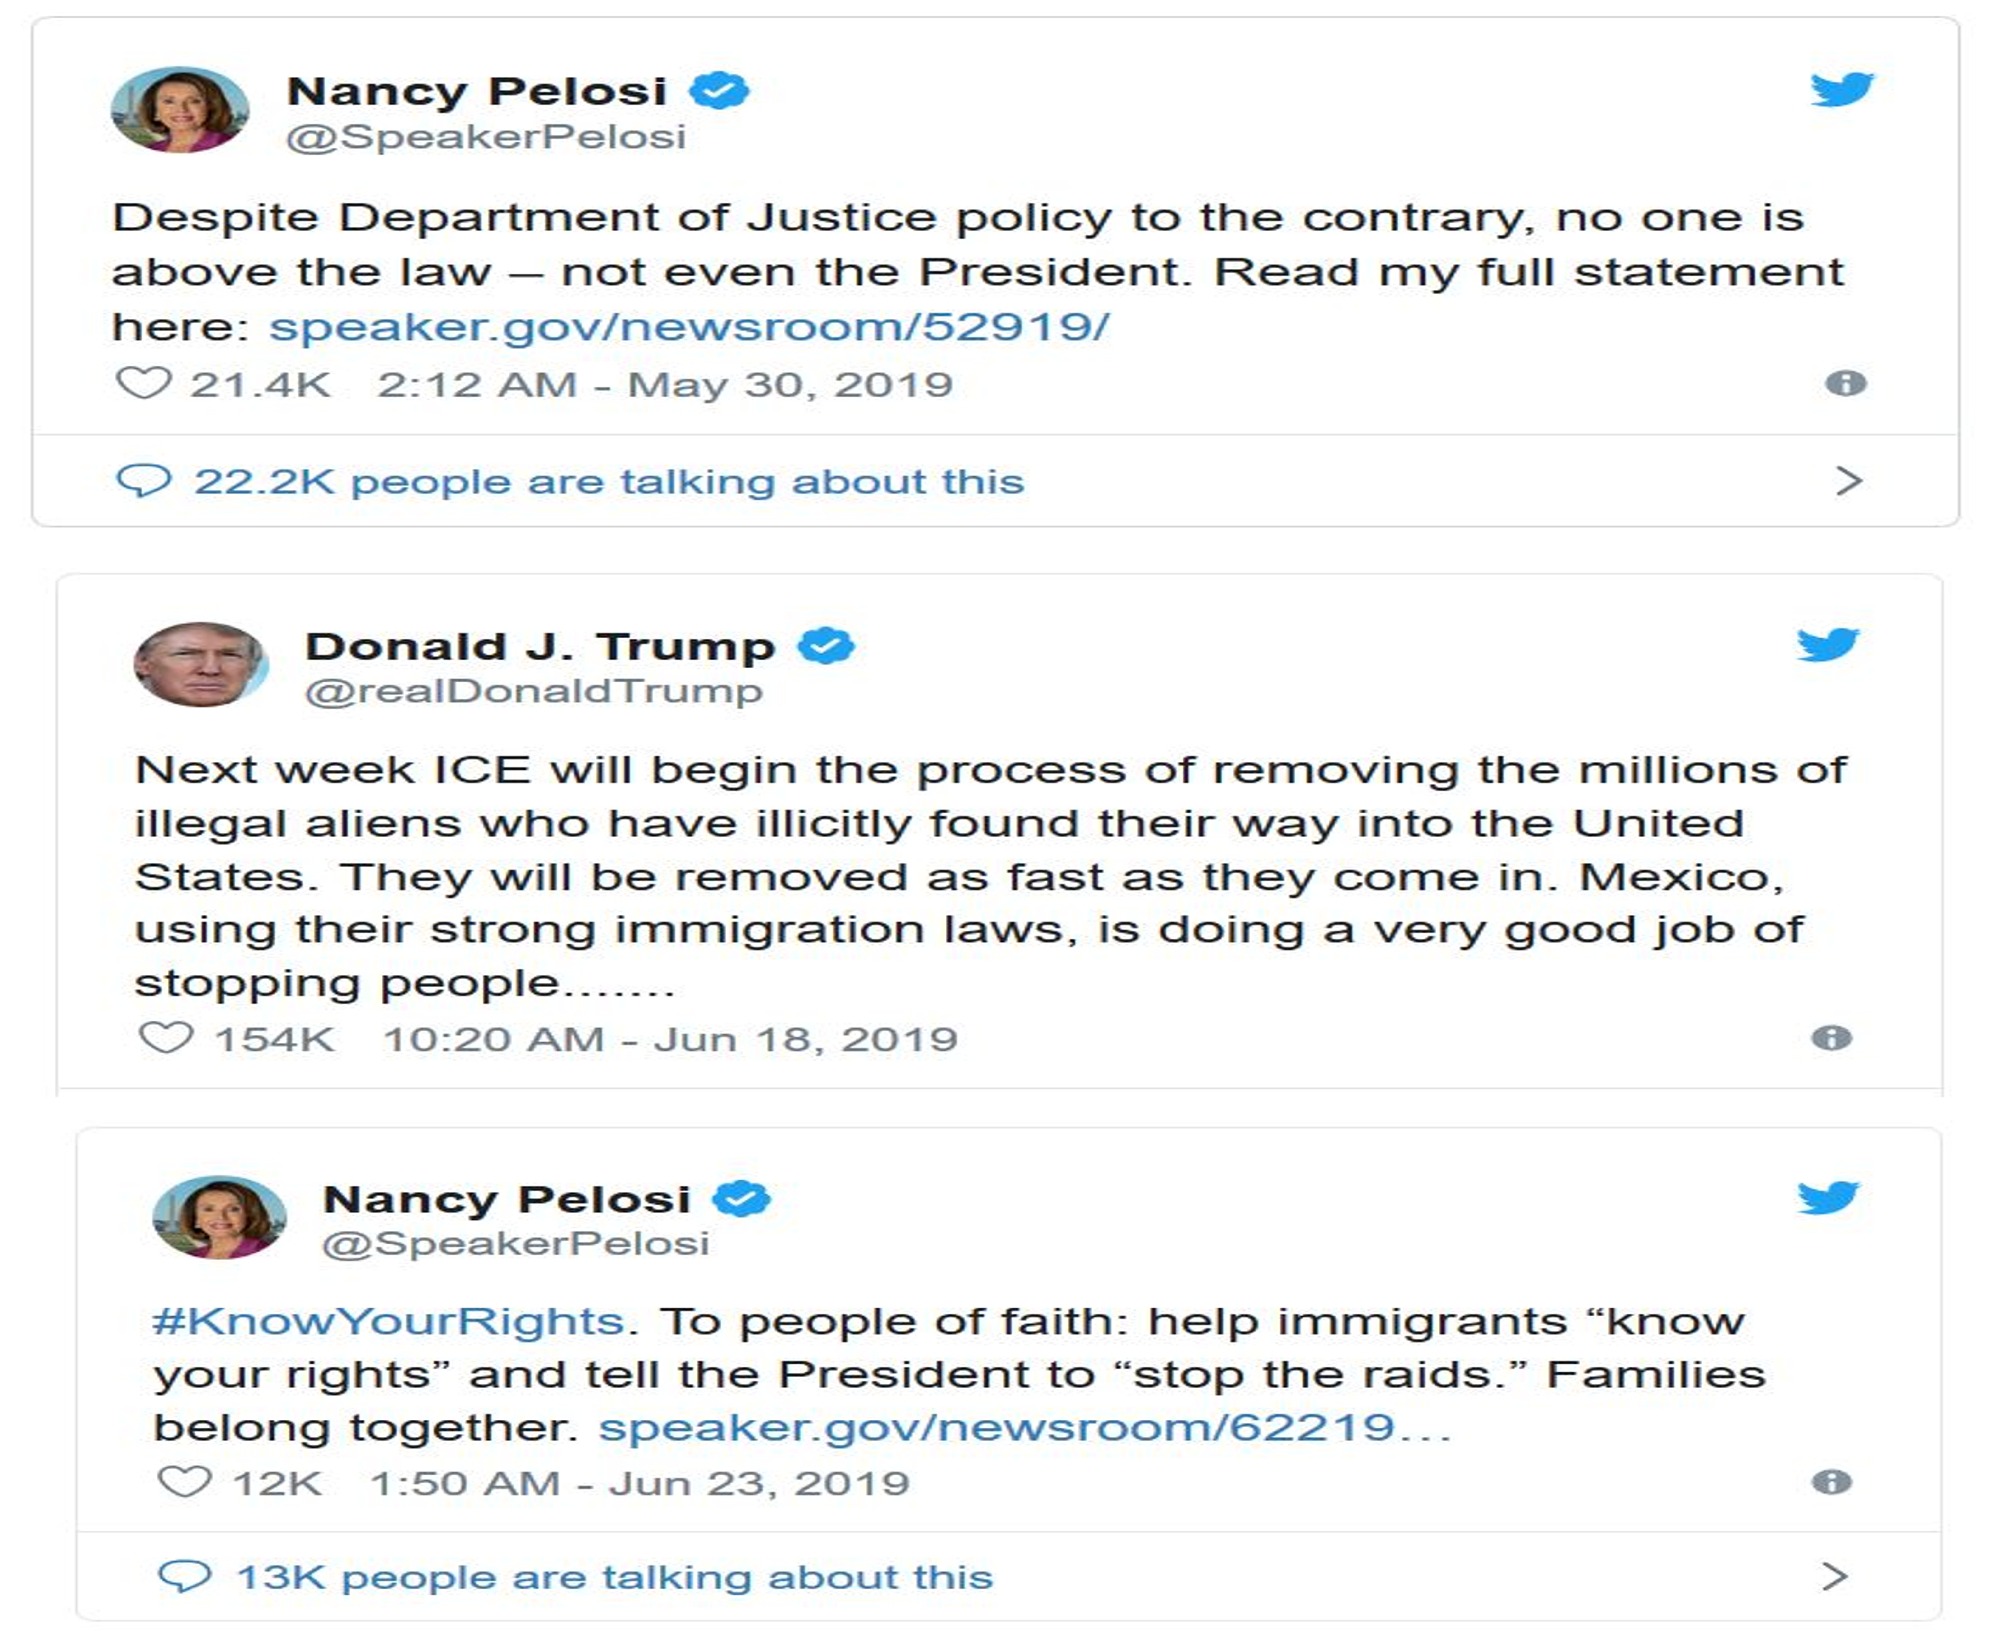 web page - Nancy Pelosi Despite Department of Justice policy to the contrary, no one is above the law not even the President. Read my full statement here speaker.govnewsroom52919 people are talking about this Donald J. Trump Trump Next week Ice will begin